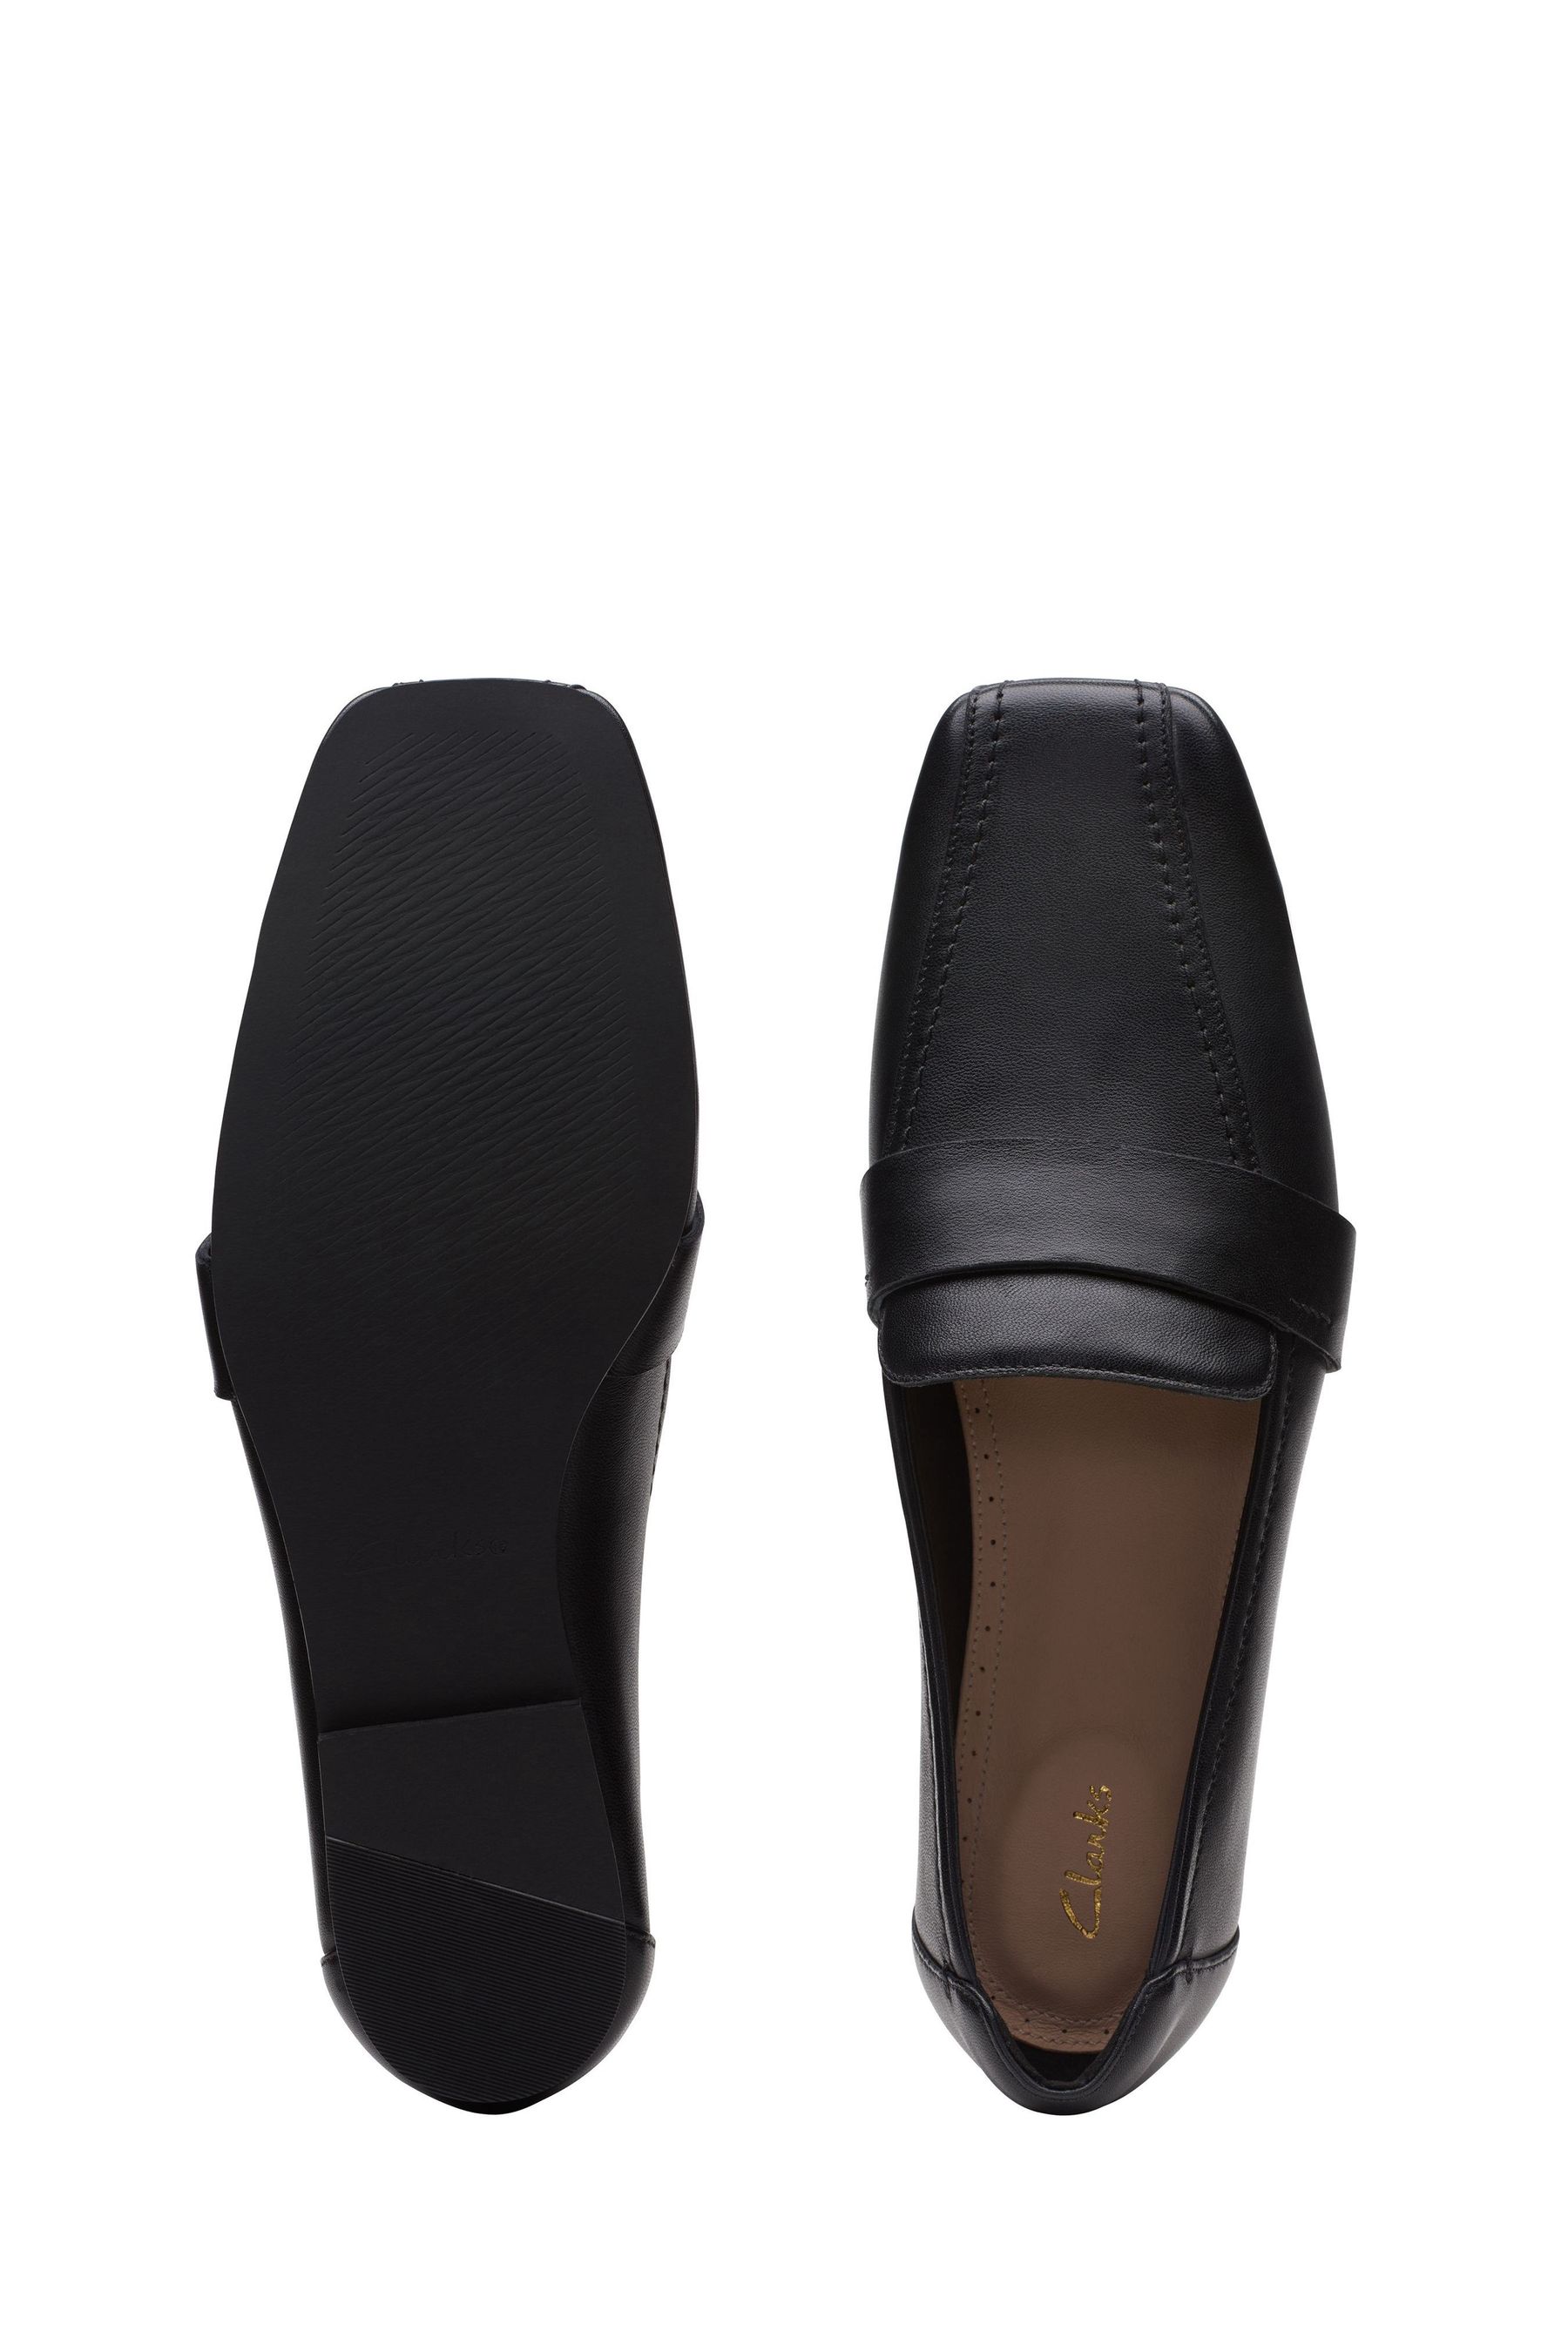 Buy Clarks Black Leather Seren Flat Shoes from the Next UK online shop